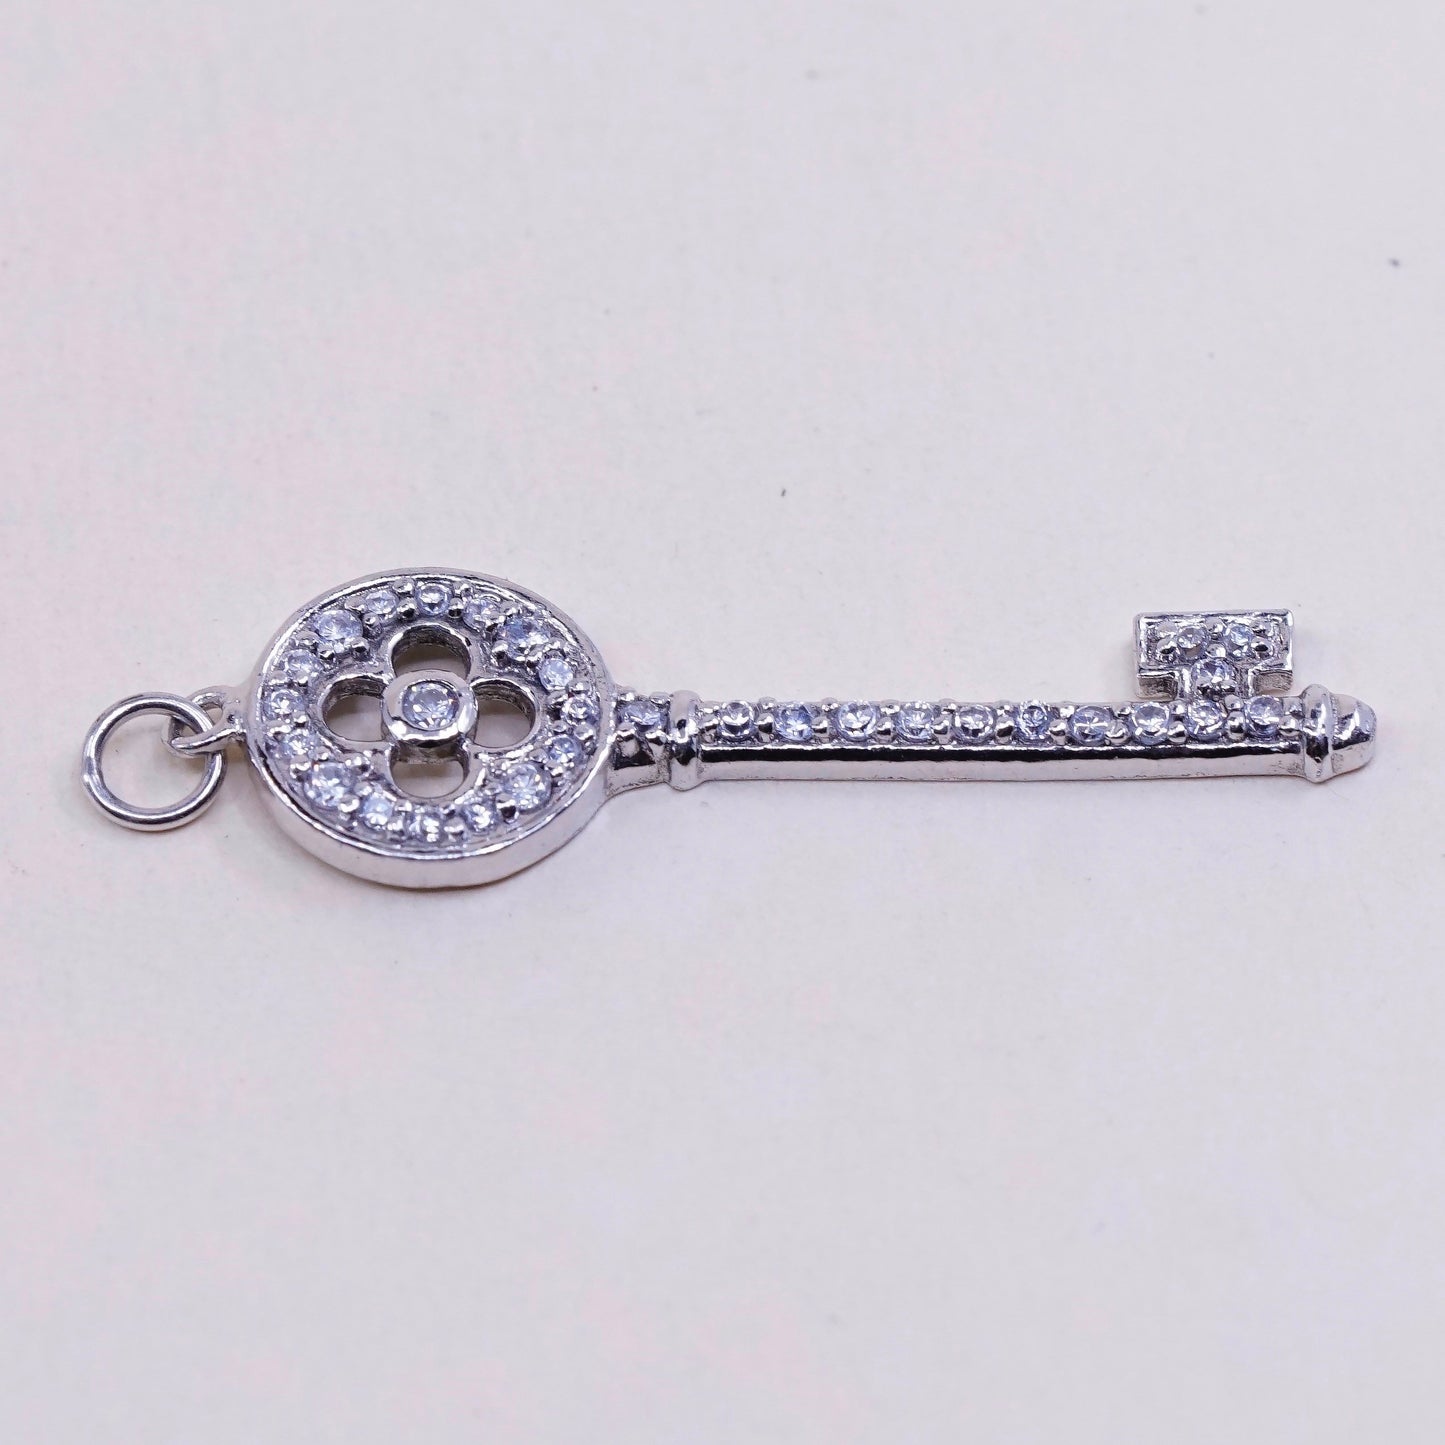 Vintage sterling silver key with cz crystal pendant, 925 silver charm